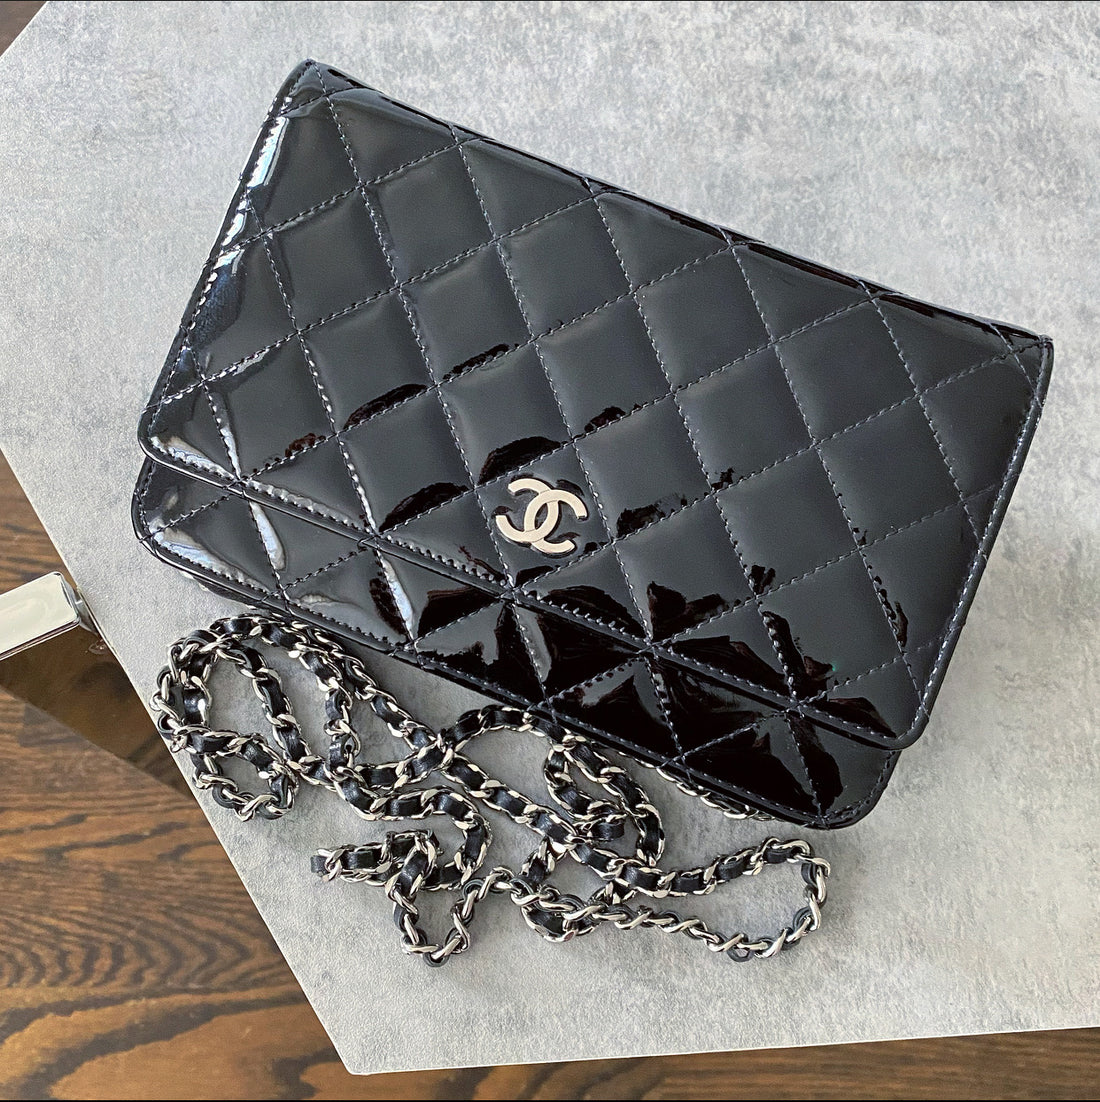 Chanel Black Patent Leather Classic Quilted Wallet on Chain WOC